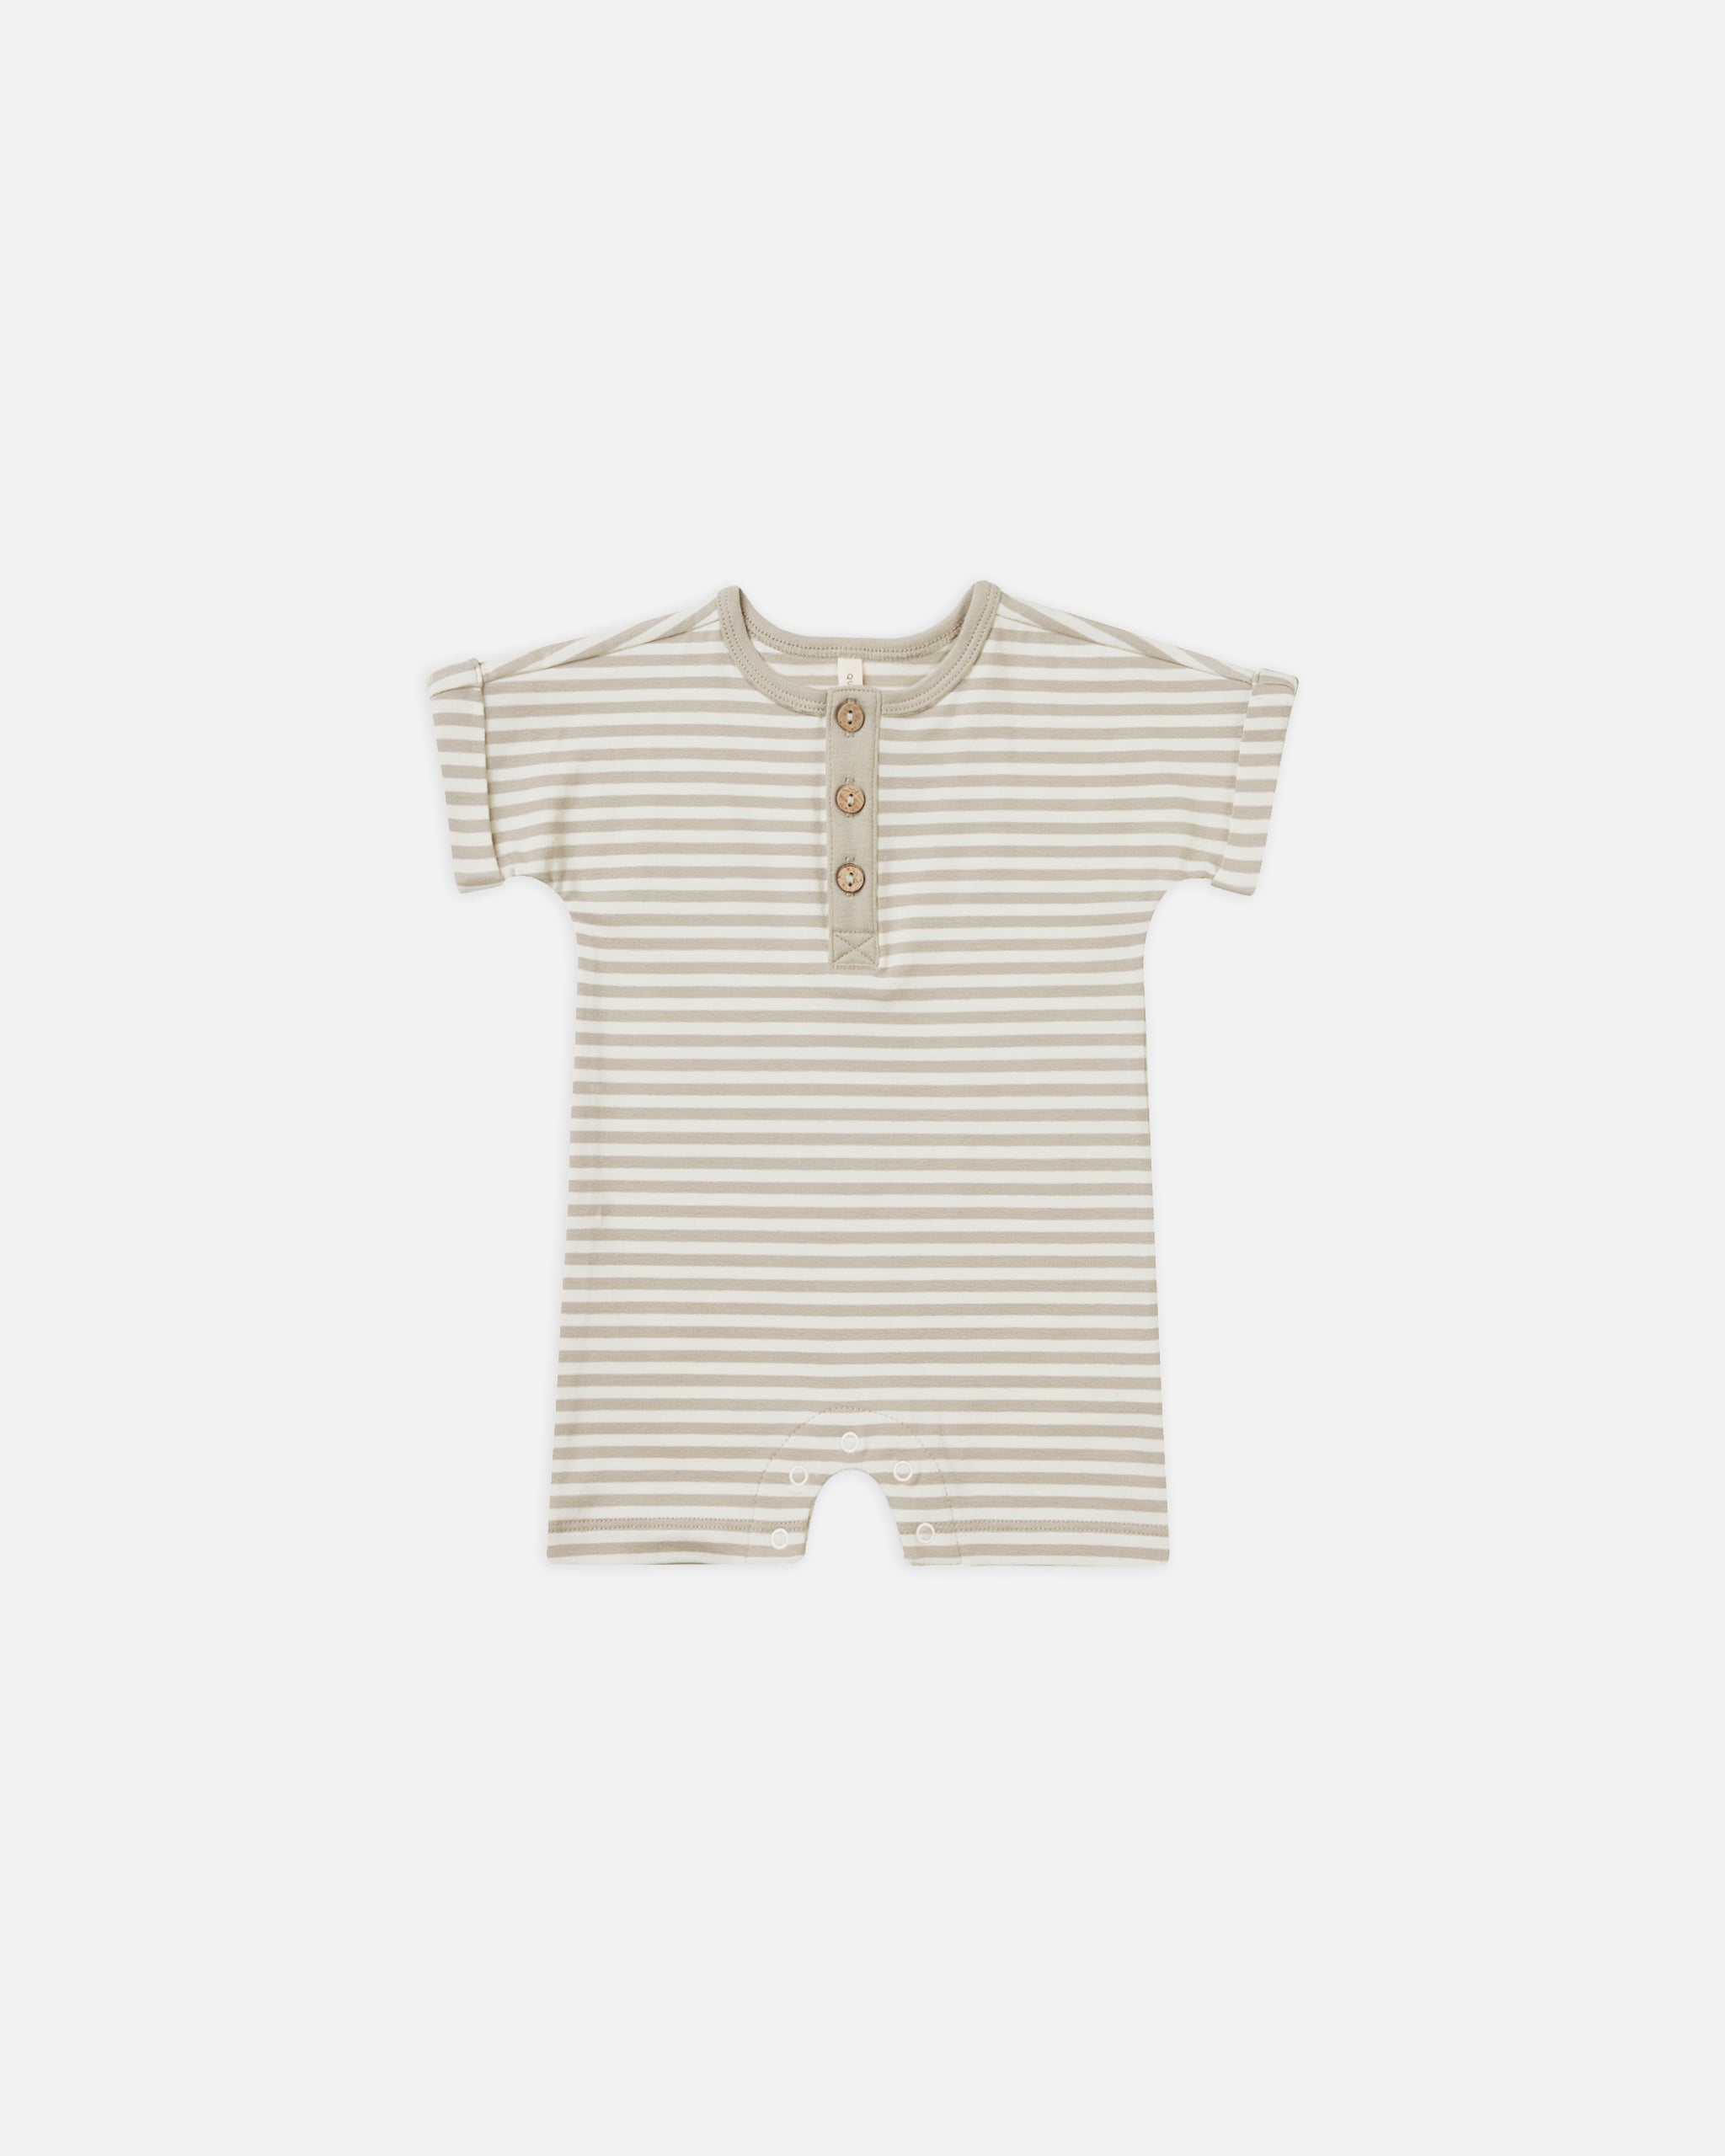 Short Sleeve One-Piece || Ash Stripe - Rylee + Cru | Kids Clothes | Trendy Baby Clothes | Modern Infant Outfits |